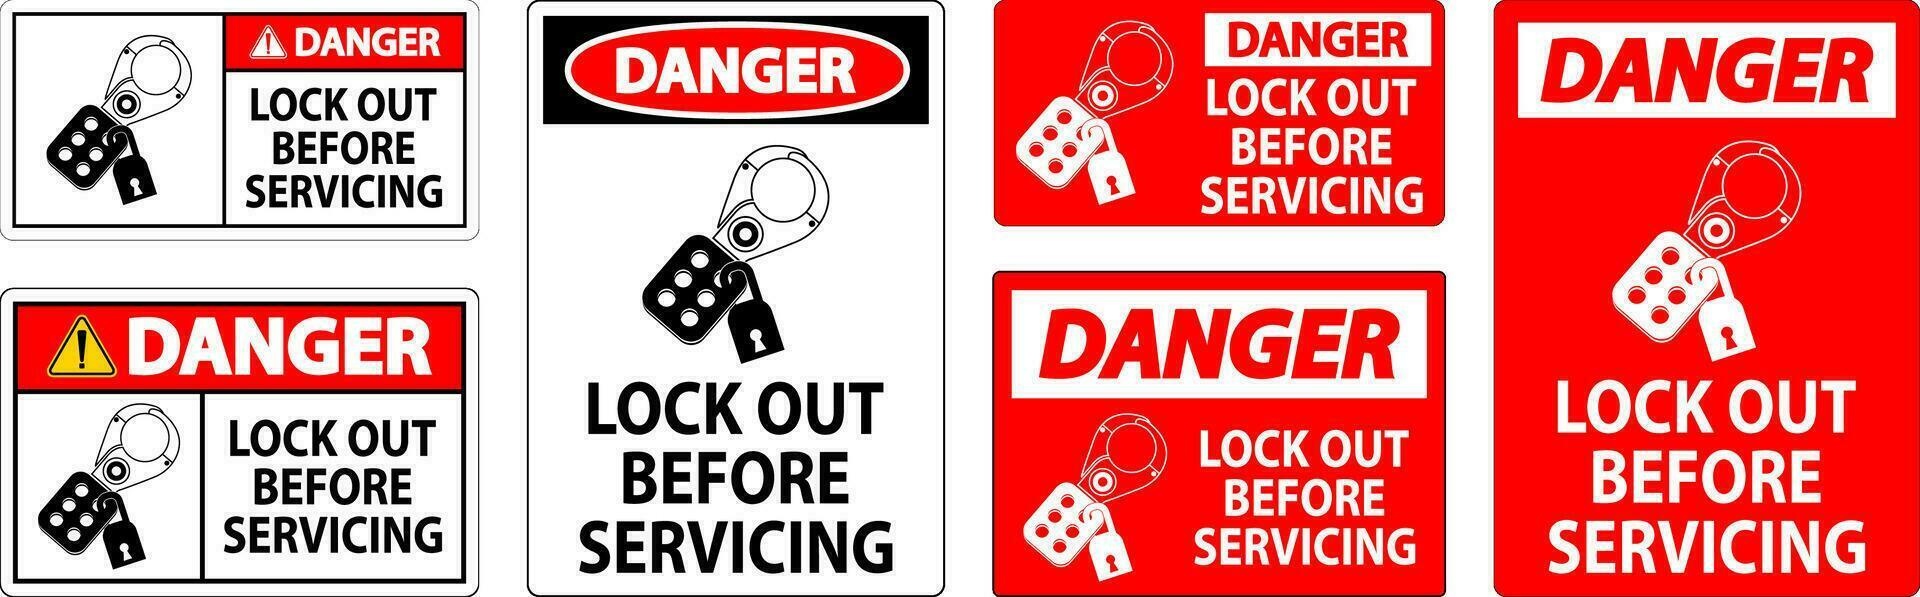 Danger Sign, Lock Out Before Servicing vector